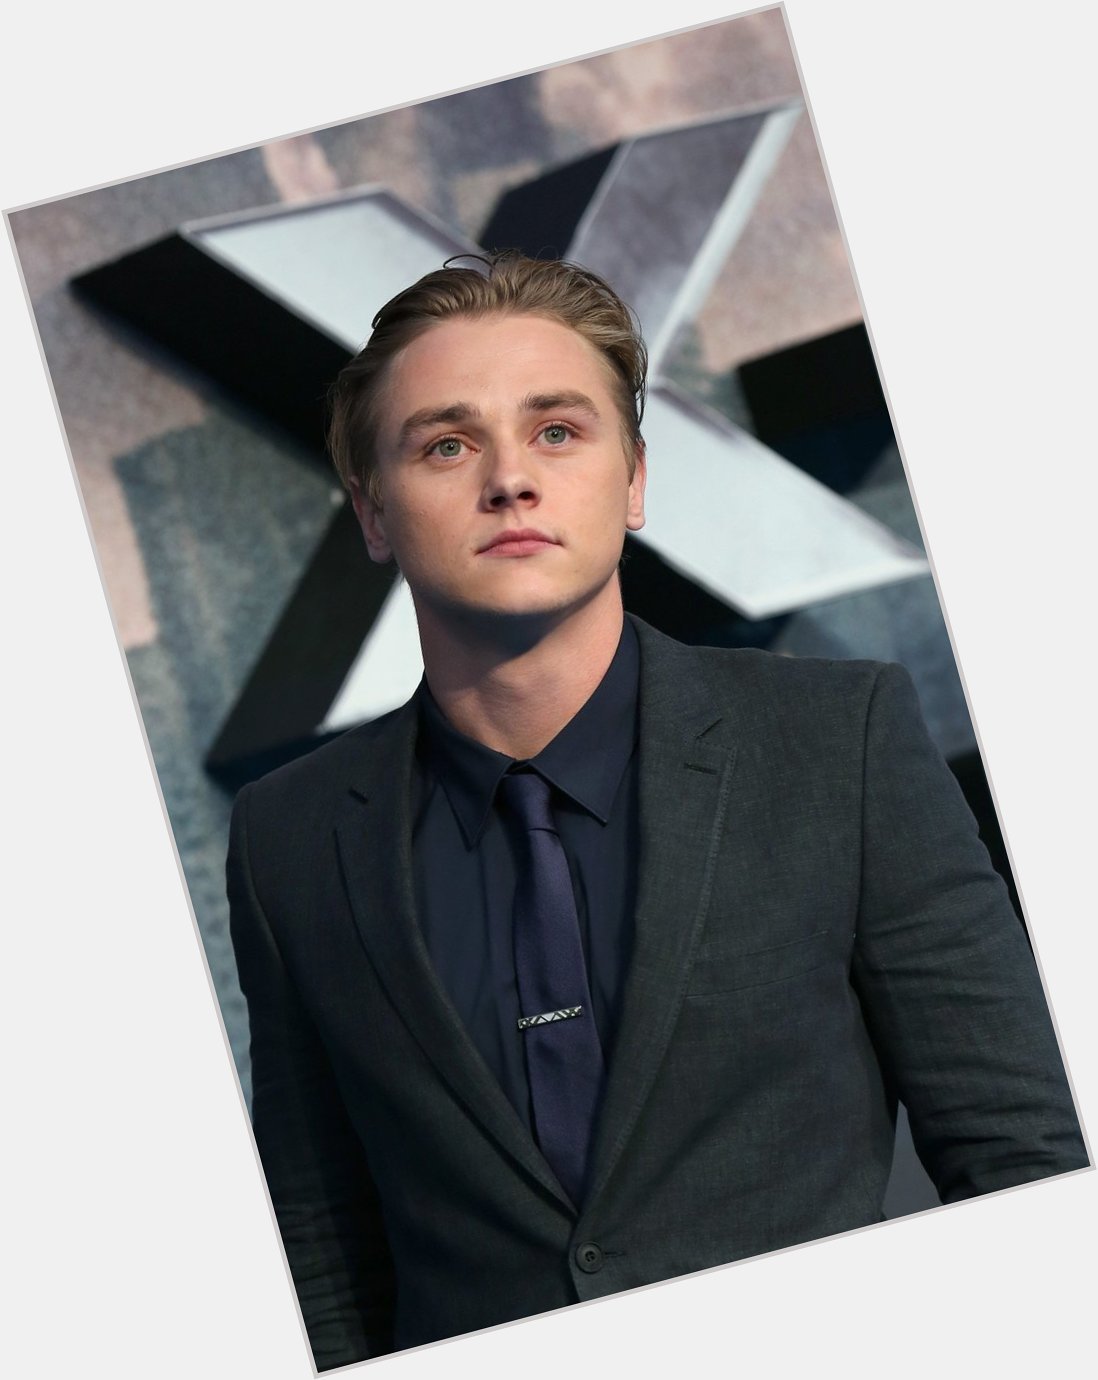 So, this gorgeous has a birthday today. It\s Ben Hardy, man! Happy birthday, lovely!  